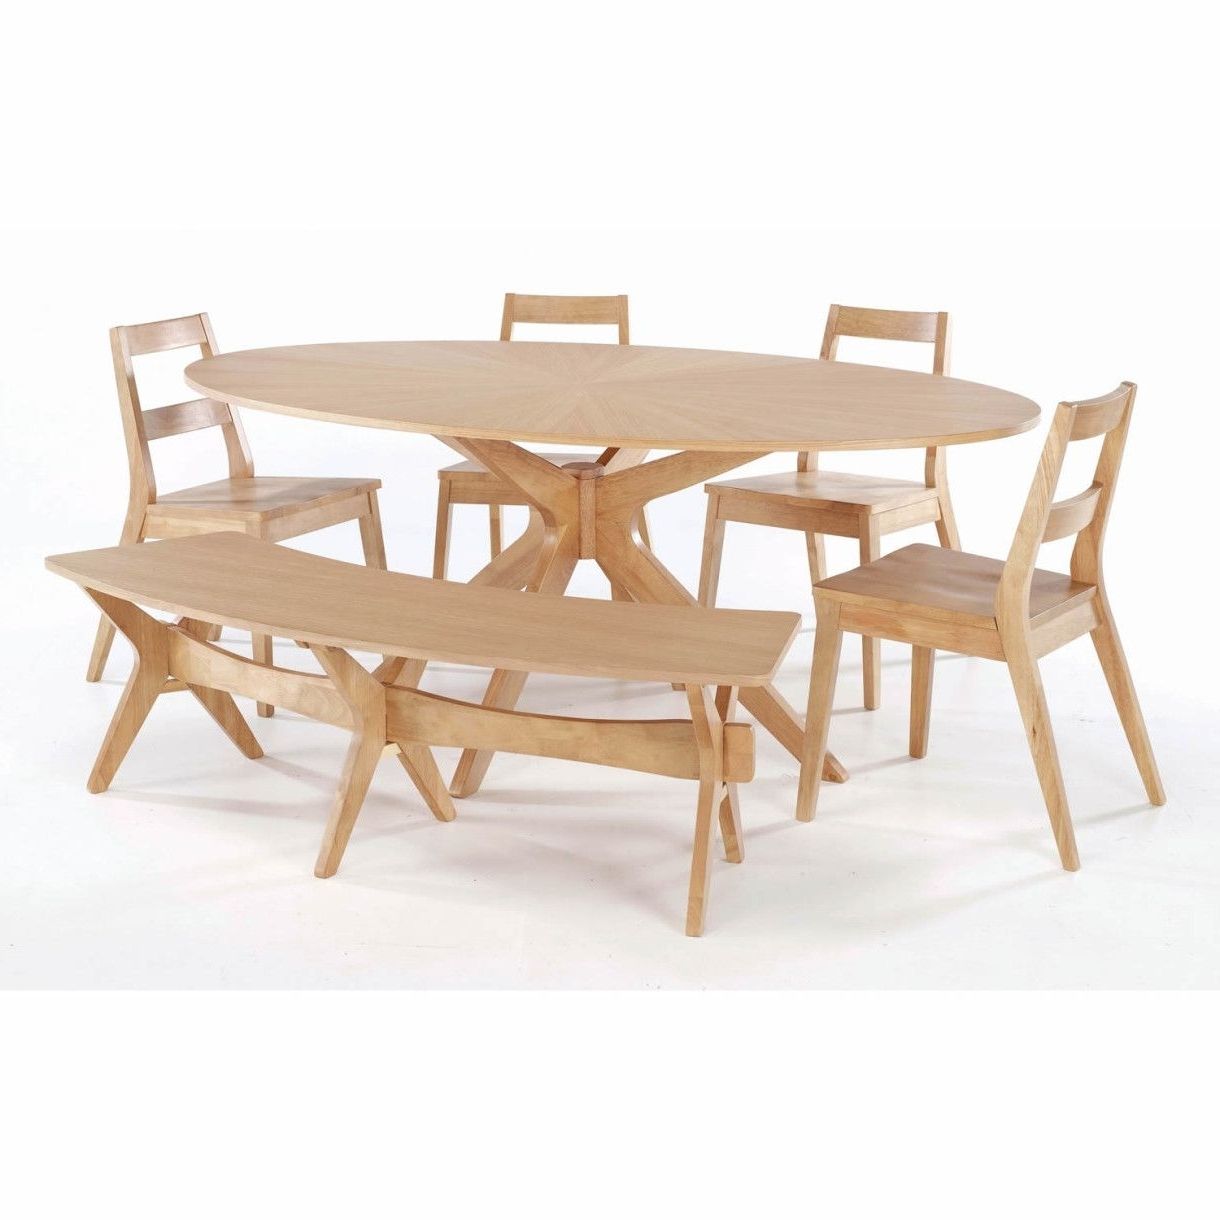 Preferred Non Wood Dining Tables Inside Match. Trendy Simplistic Oval Dining Table With 4 Non Armchairs And (Photo 14 of 25)